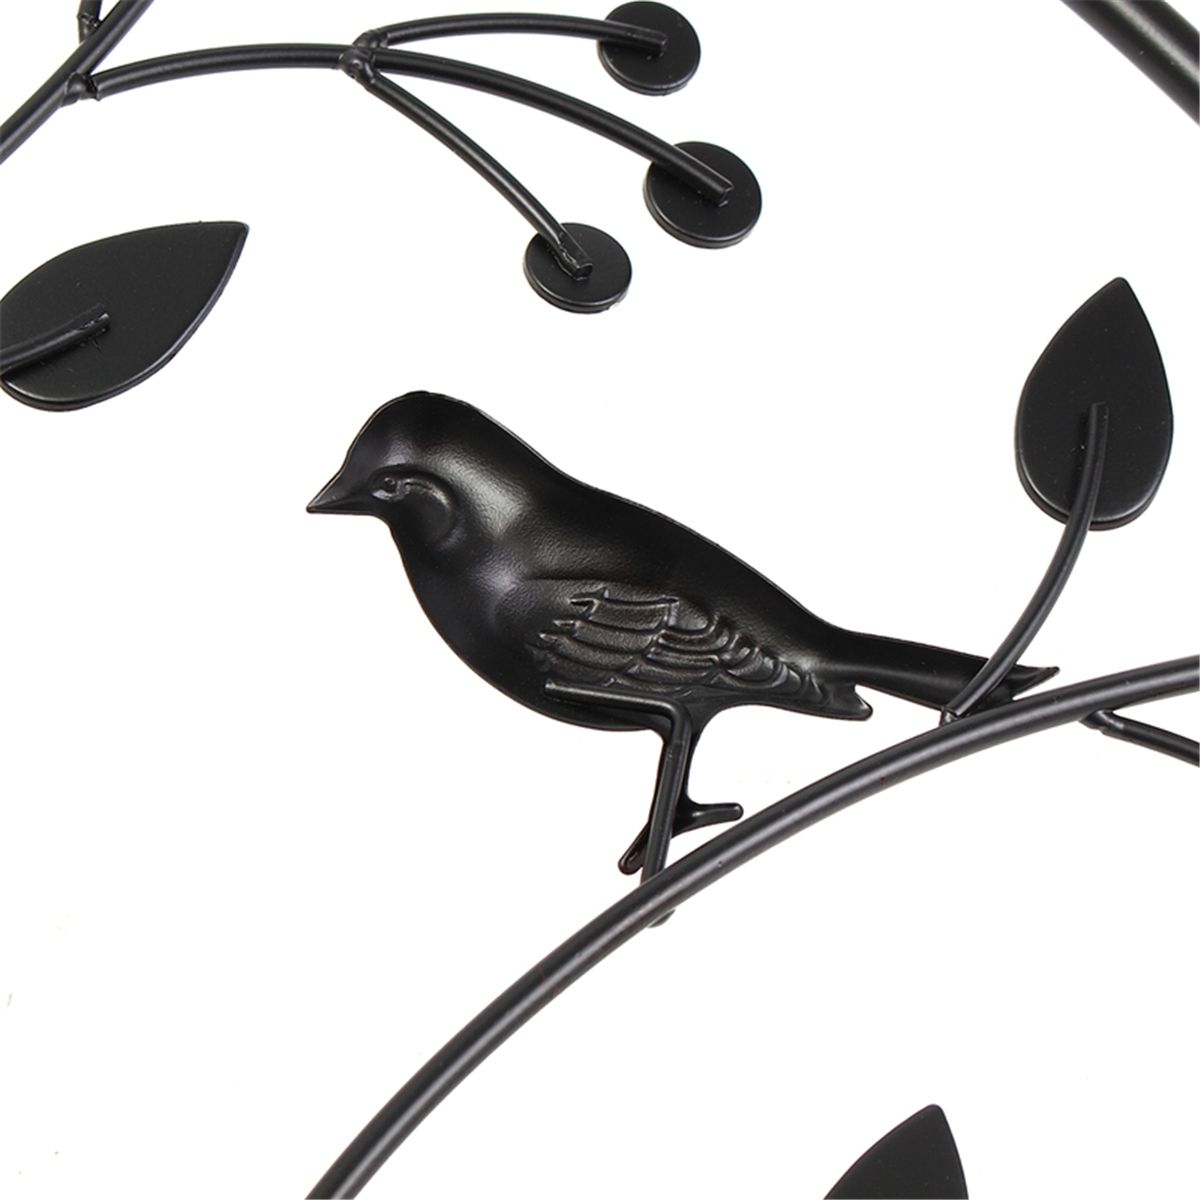 Birds-Tree-Iron-Sculpture-Ornament-Home-Room-Wall-Hanging-Decorations-1605156